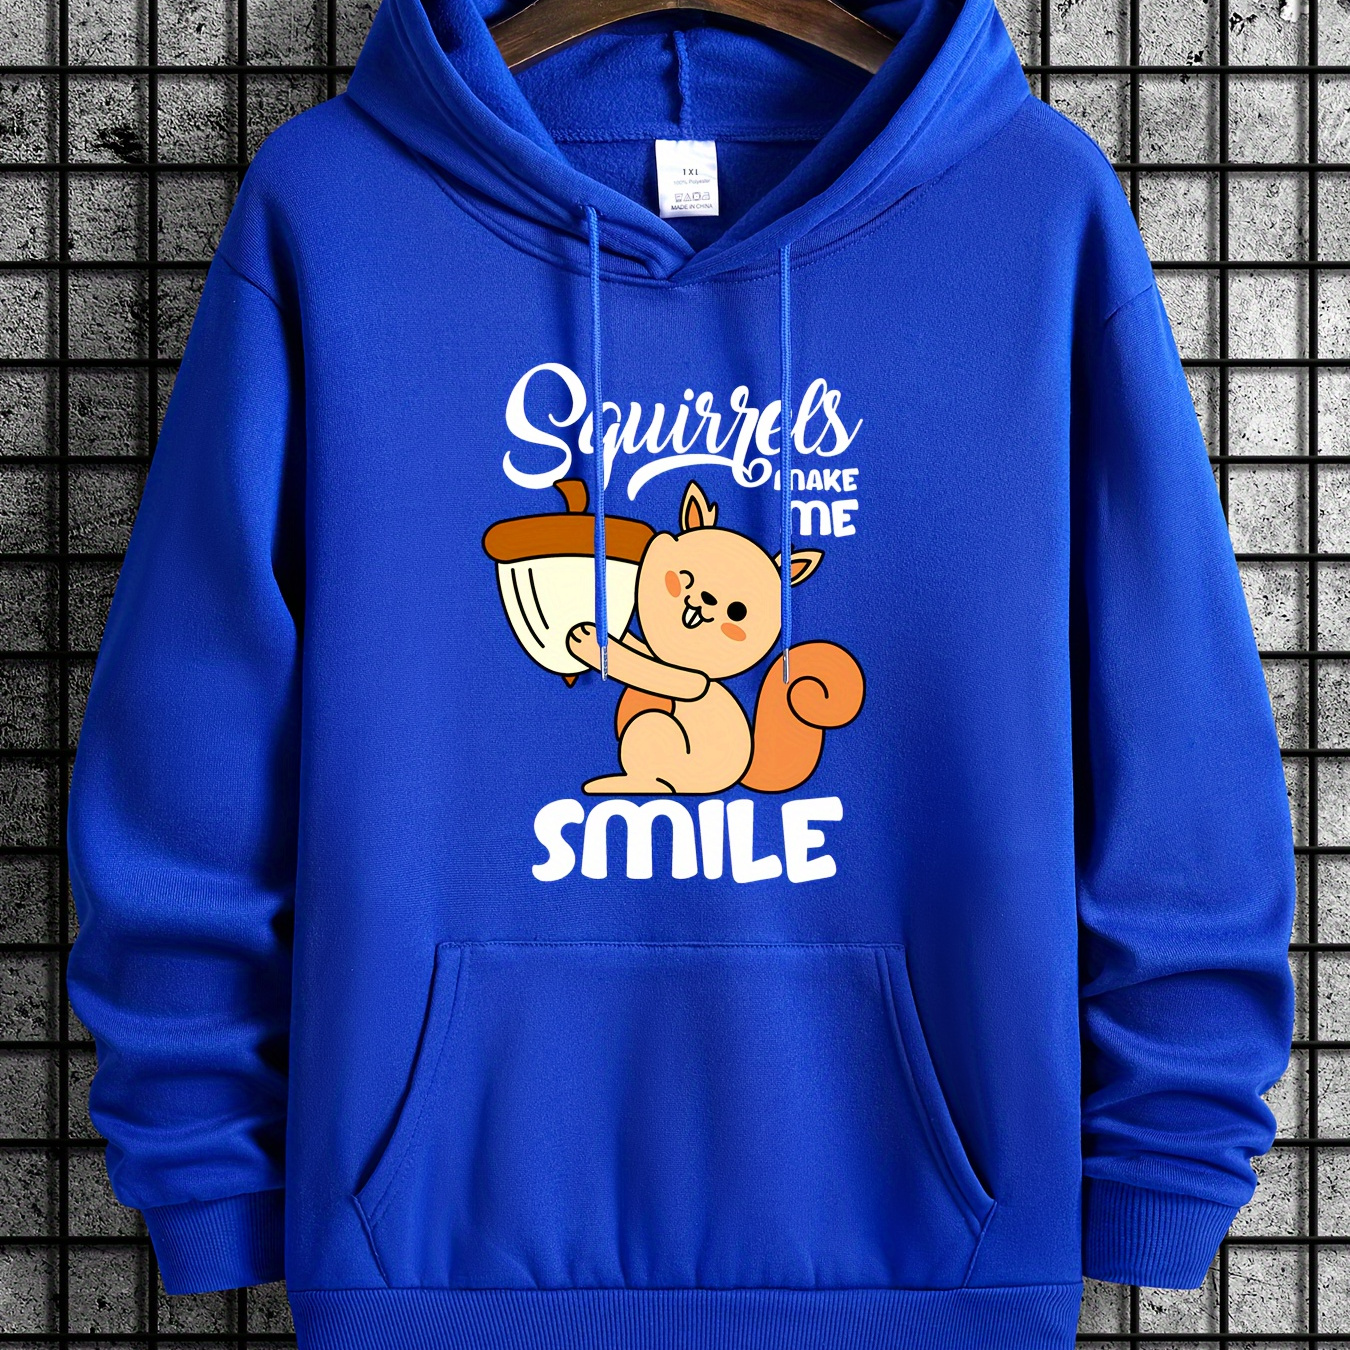 

Plus Size Men's Anime Squirrel Print Hoodies Fashion Casual Hooded Sweatshirt For Spring Fall Winter, Men's Clothing